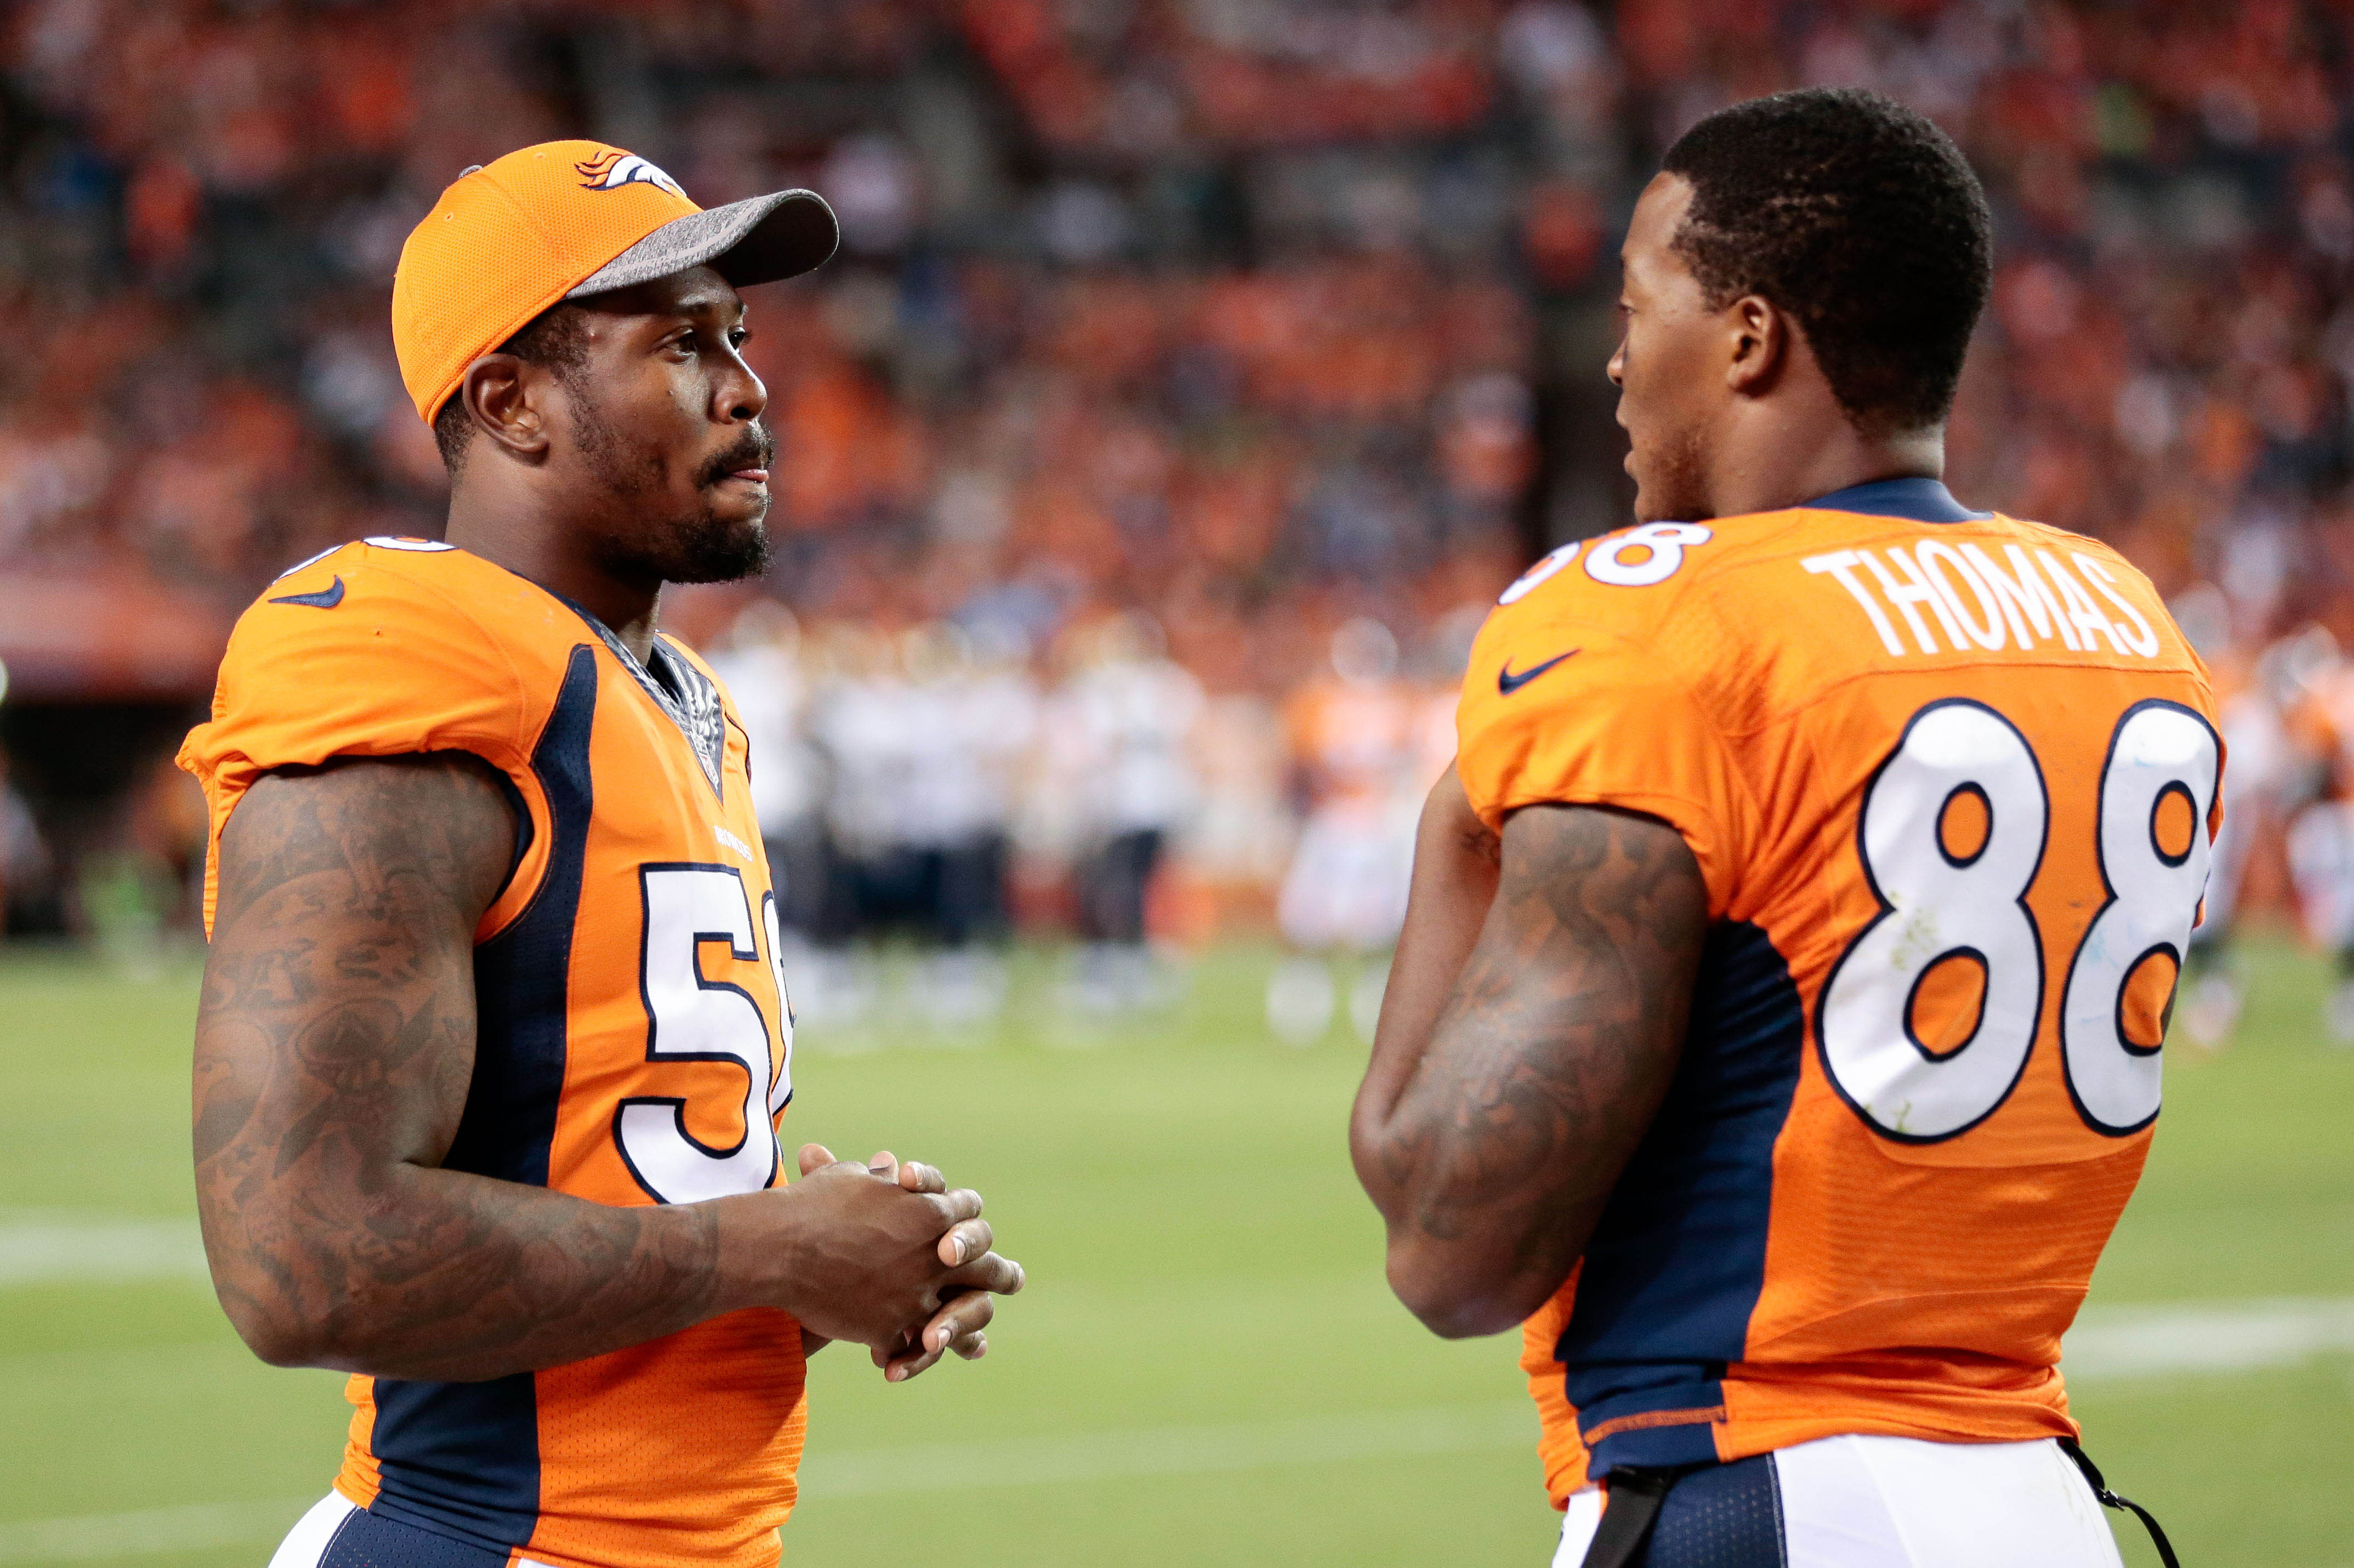 Denver Broncos outside linebacker Von Miller (58) talks with wide receiver Demaryius Thomas (88) in the third quarter against the Los Angeles Rams at Sports Authority Field at Mile High. The Broncos defeated the Rams 17-9.